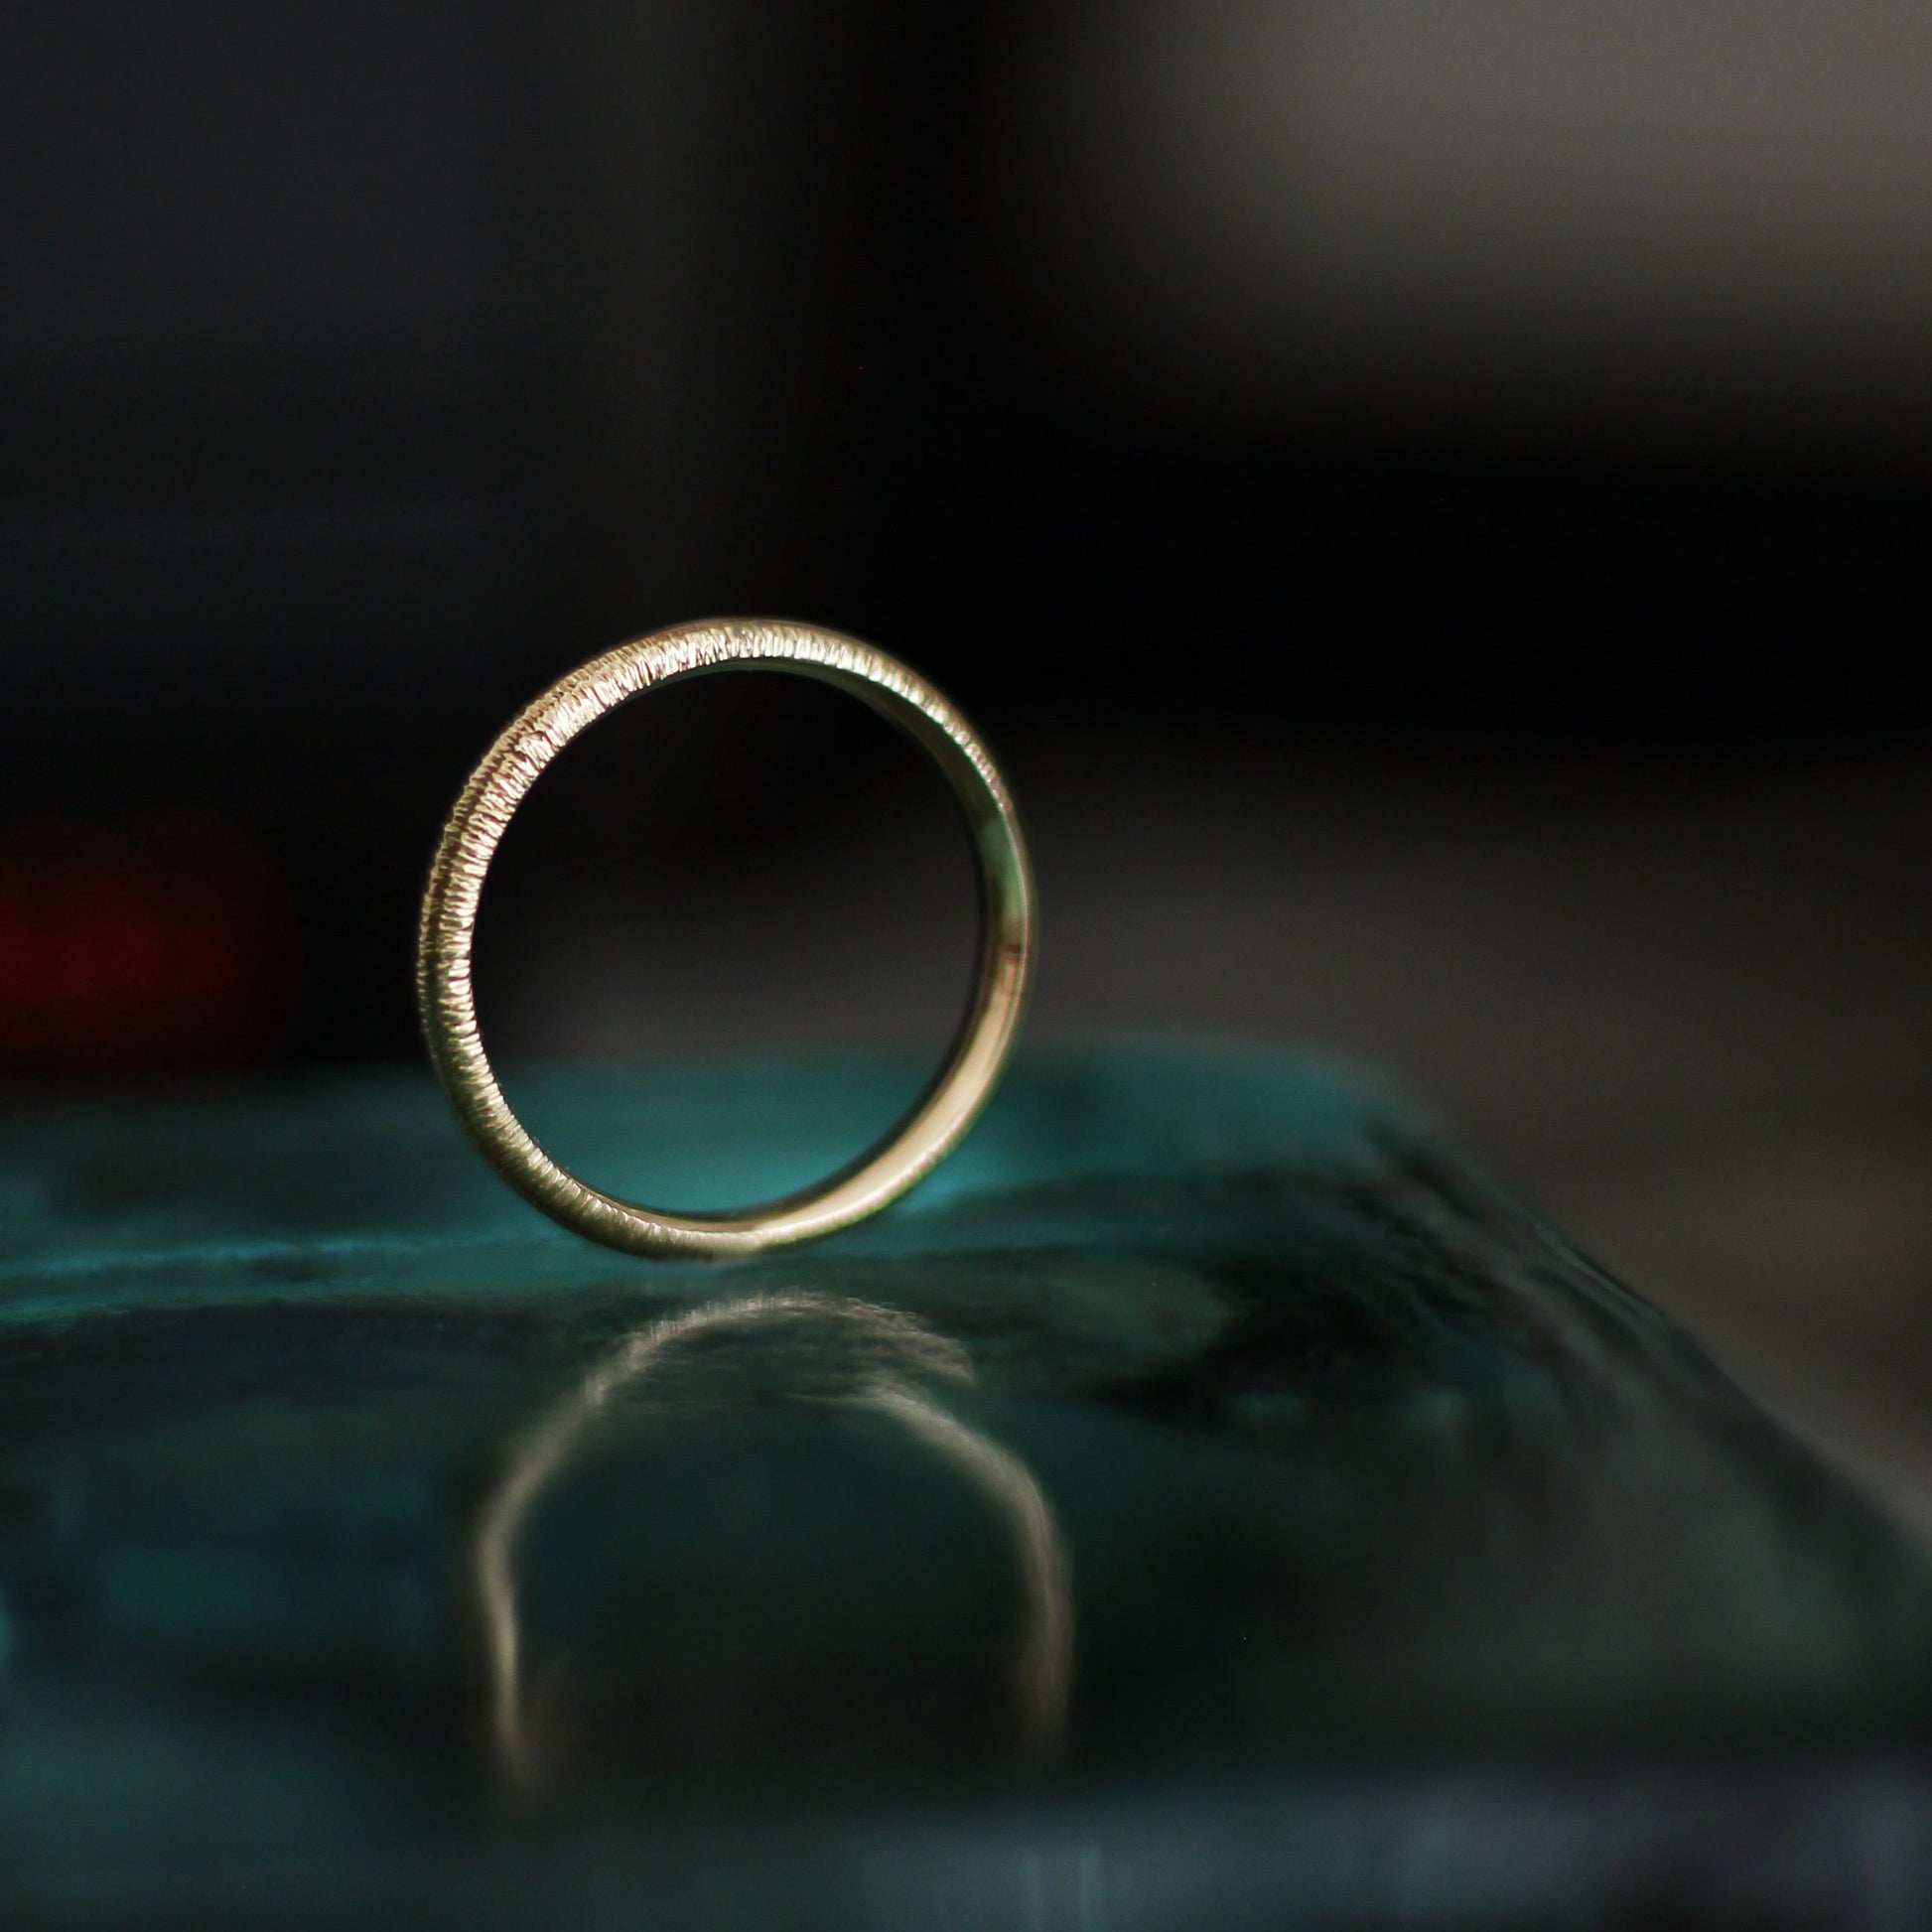 Moonlight Hammered Ring - 9ct / 18ct Gold, side view - Aisling Chou Studio